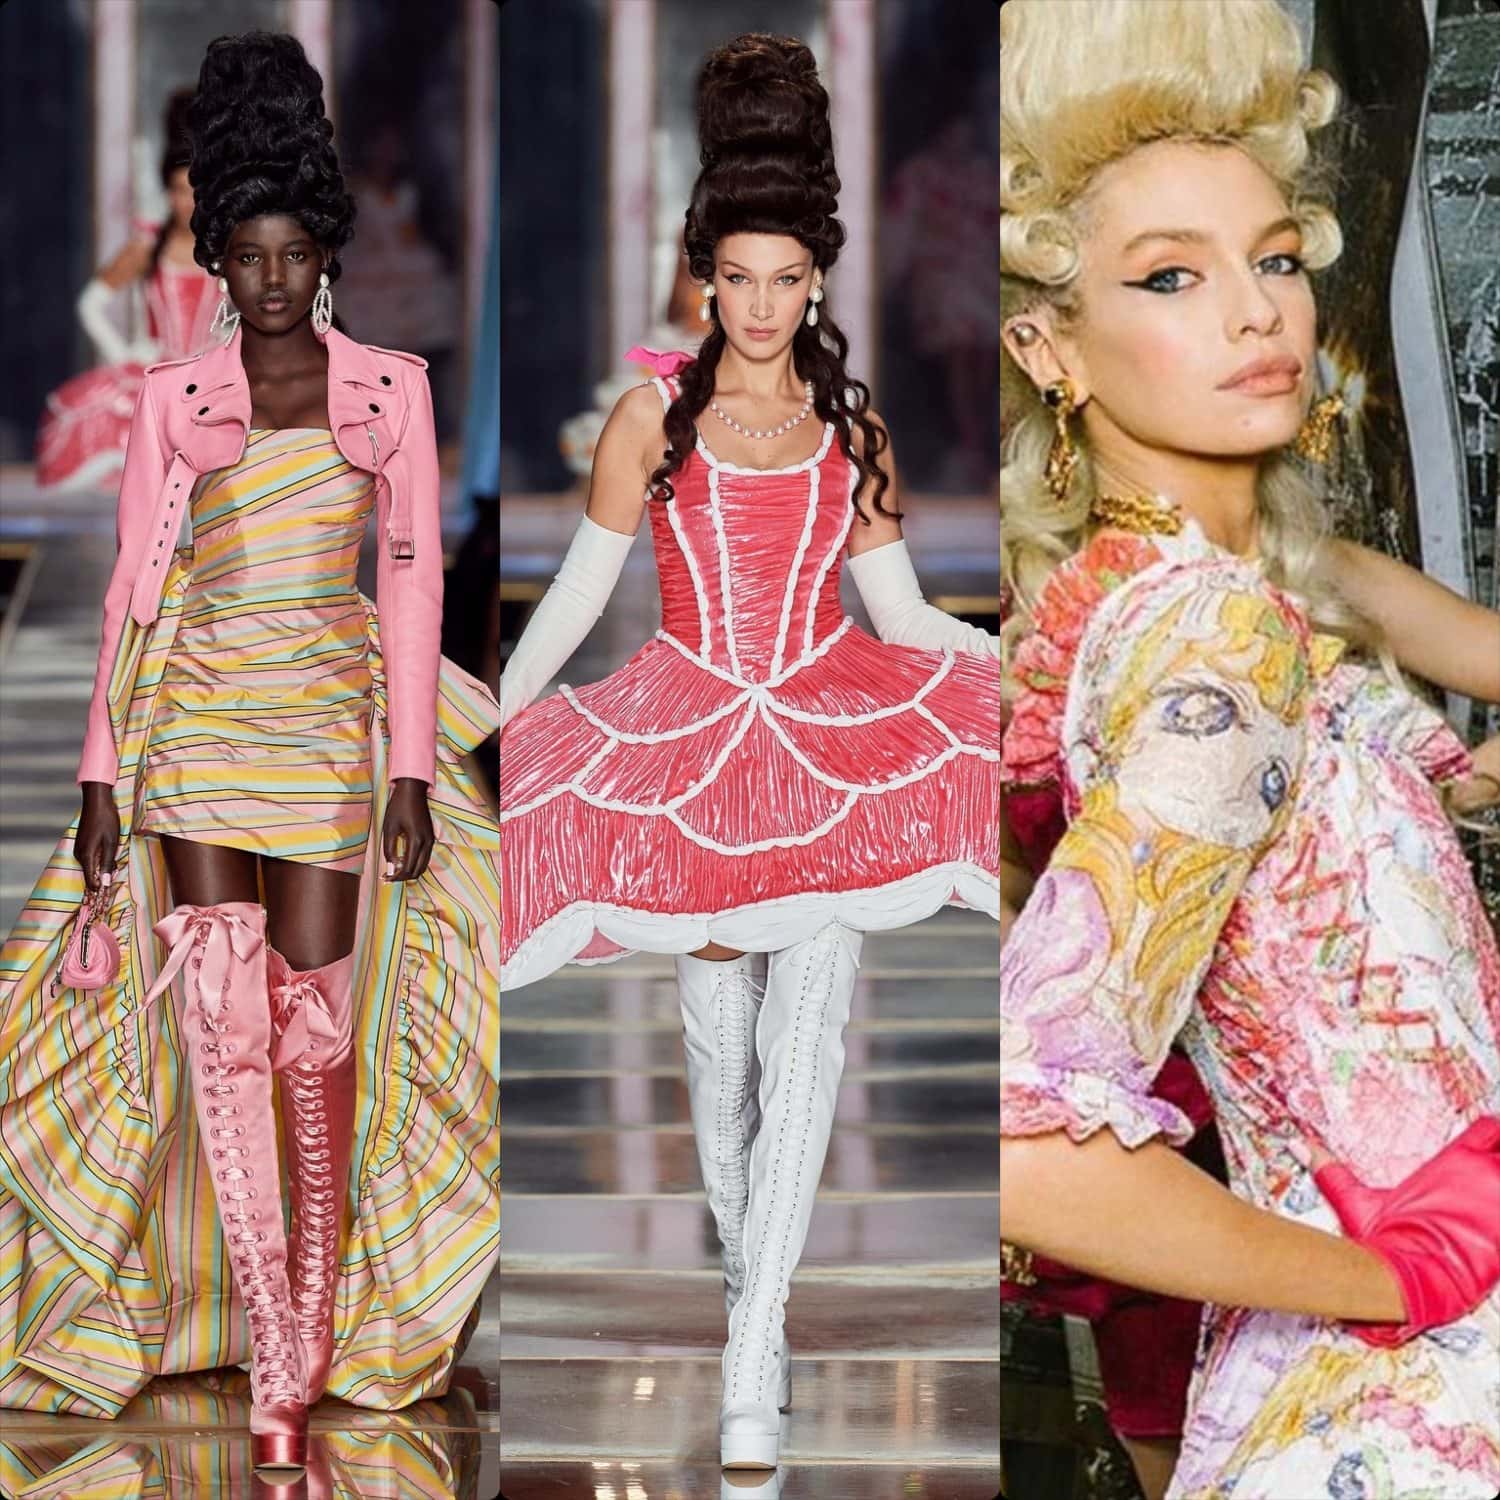 Moschino Fall-Winter 2020-2021 Milan Fashion Week Ready-to-Wear. Marie Antoinette - "Let them eat Moschino". RUNWAY MAGAZINE ® Collections. RUNWAY NOW / RUNWAY NEW